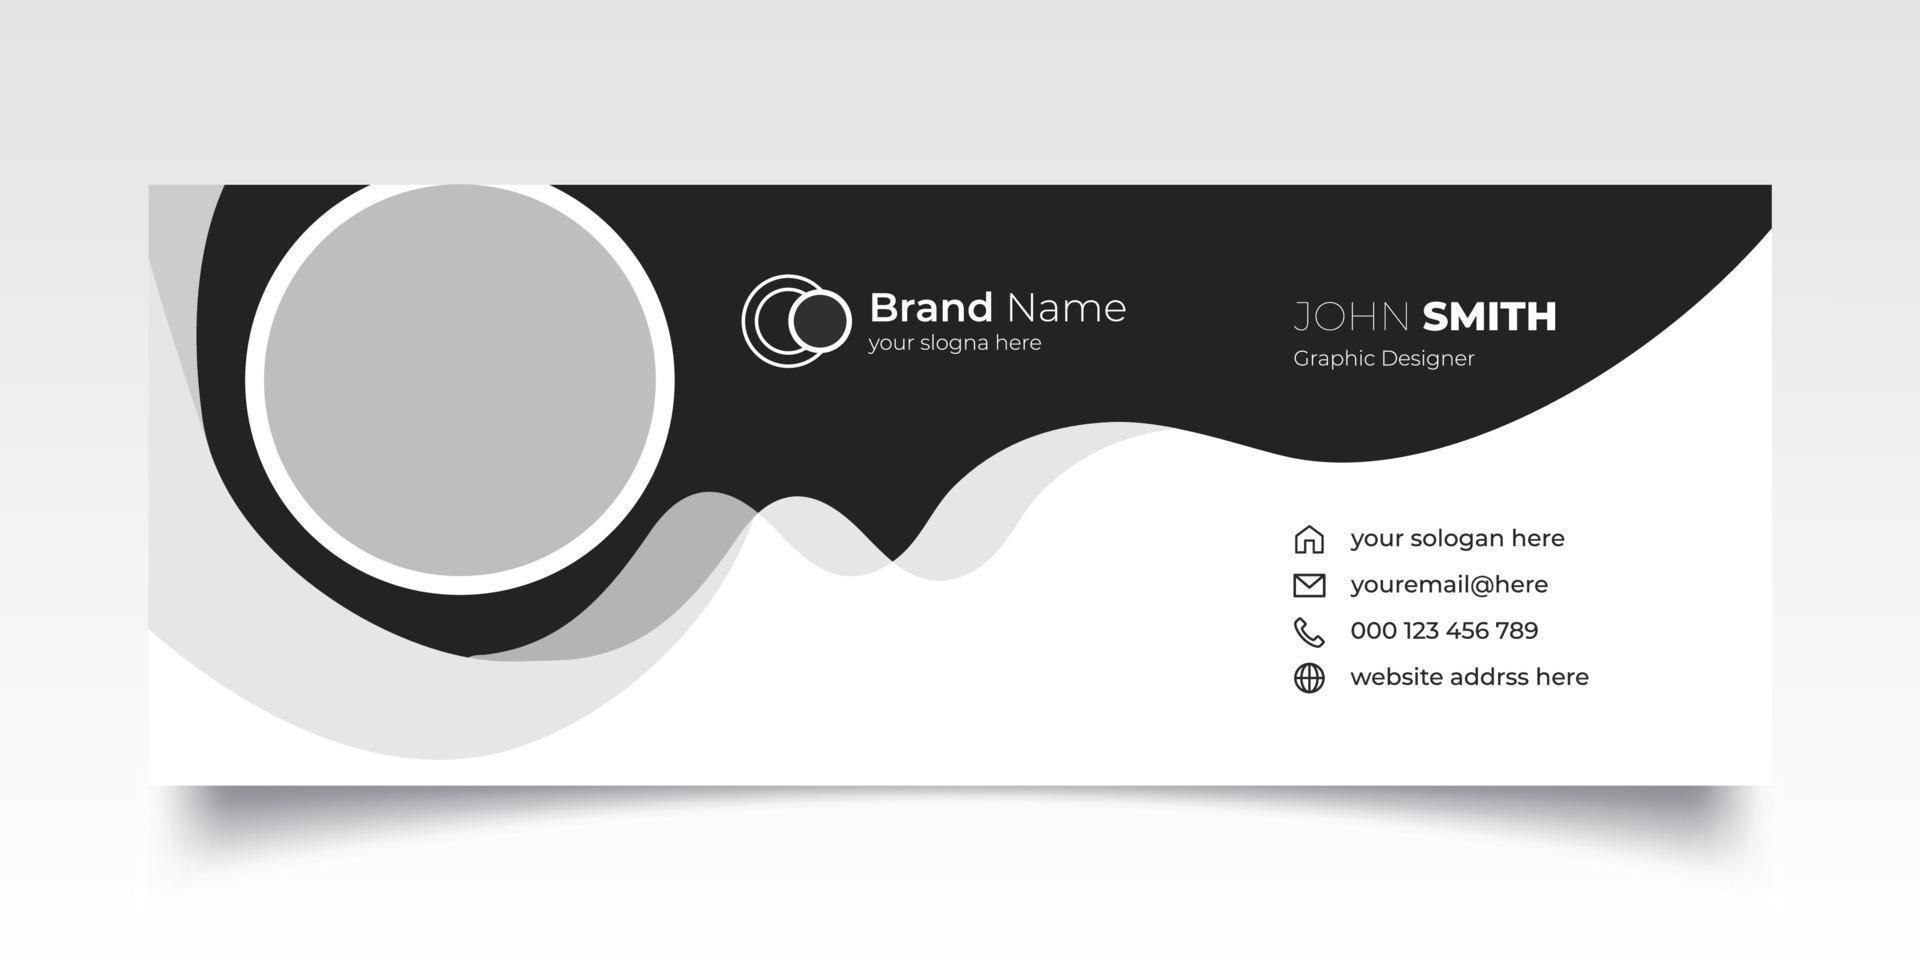 Corporate Modern Email Signature Design template vector